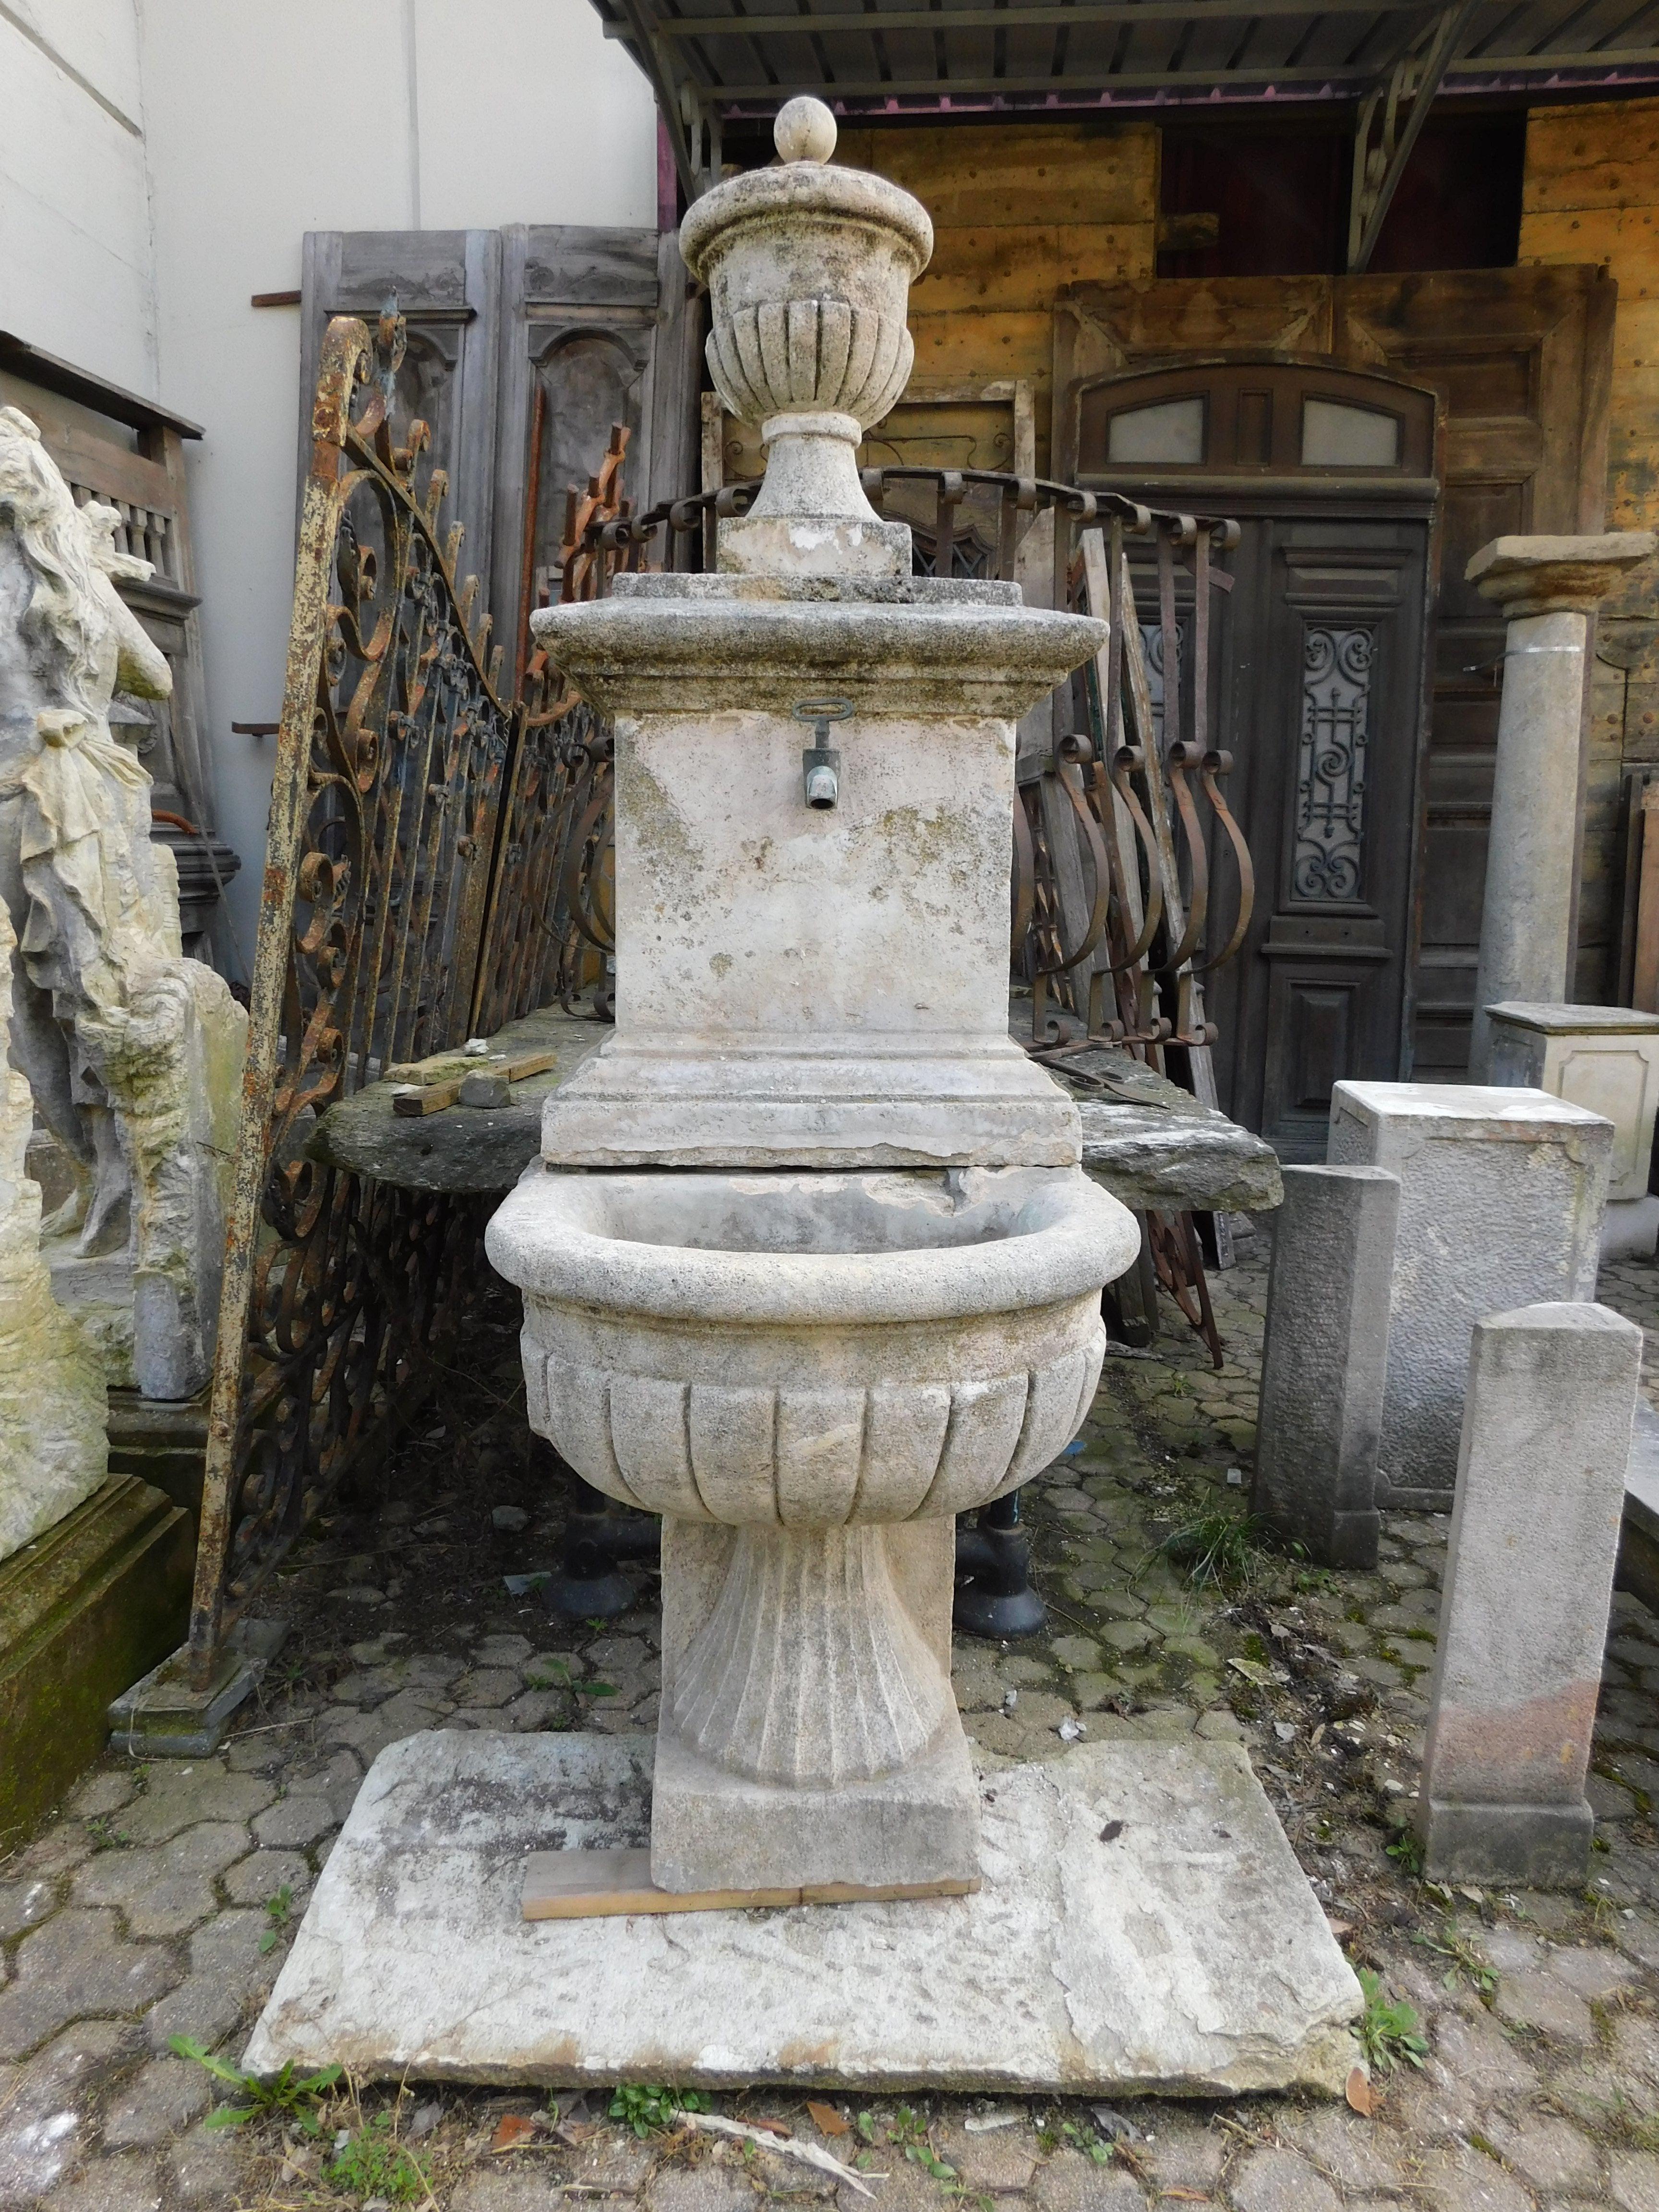 Ancient and important wall fountain, richly carved in gray stone, with iron filler, ashlar basin and wall pillar, built for a garden in Italy, in the 19th century, from southern Italy, measures cm w 66 x H 215 (127 H only washbasin) x d 85 maximum